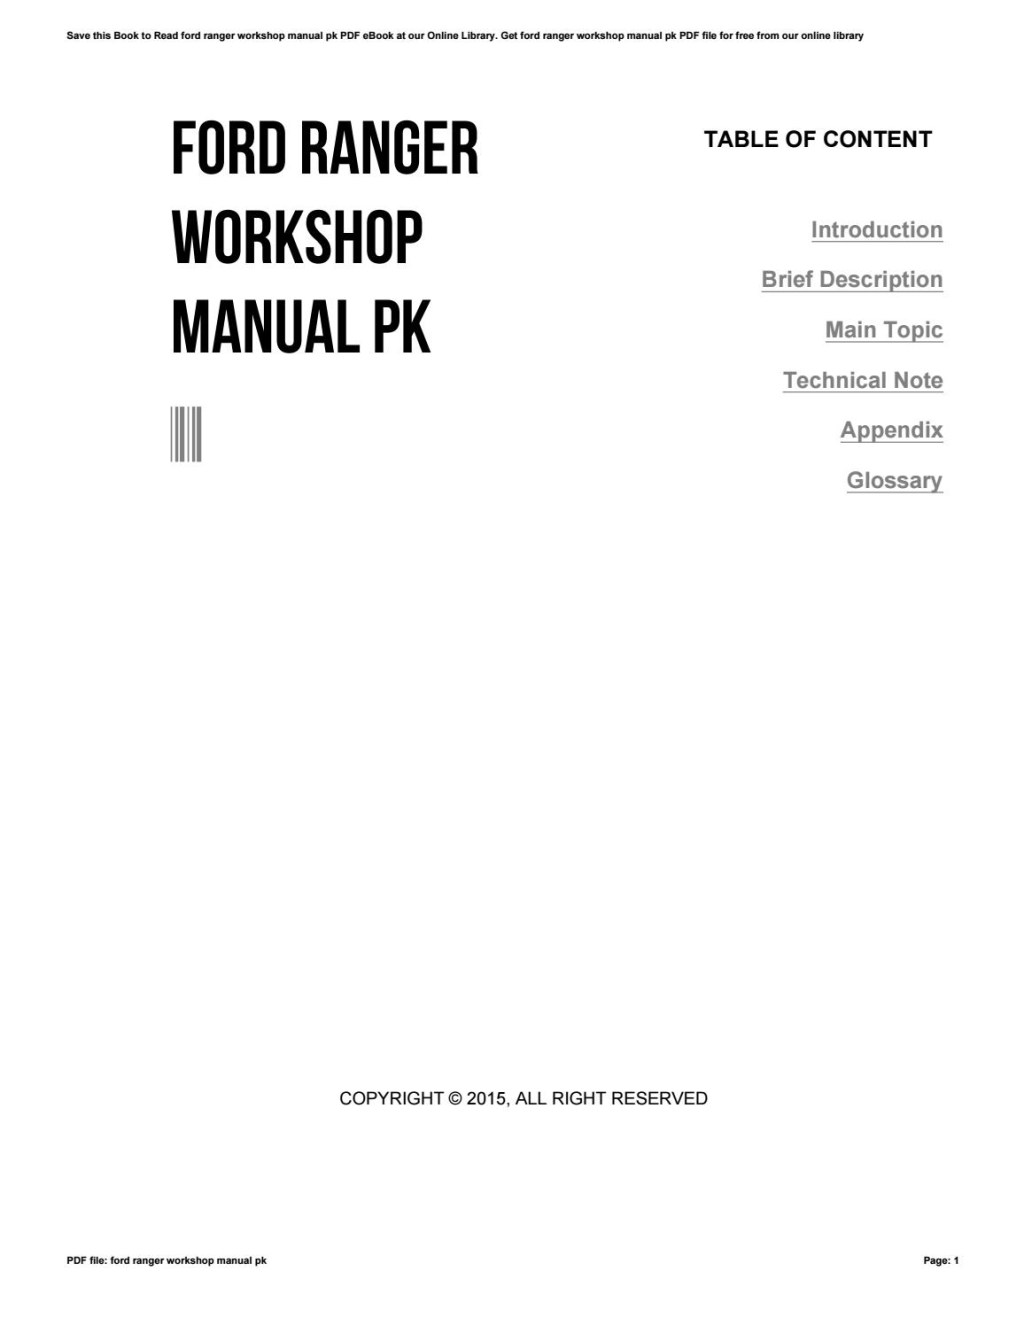 Picture of: Ford ranger workshop manual pk by e – Issuu